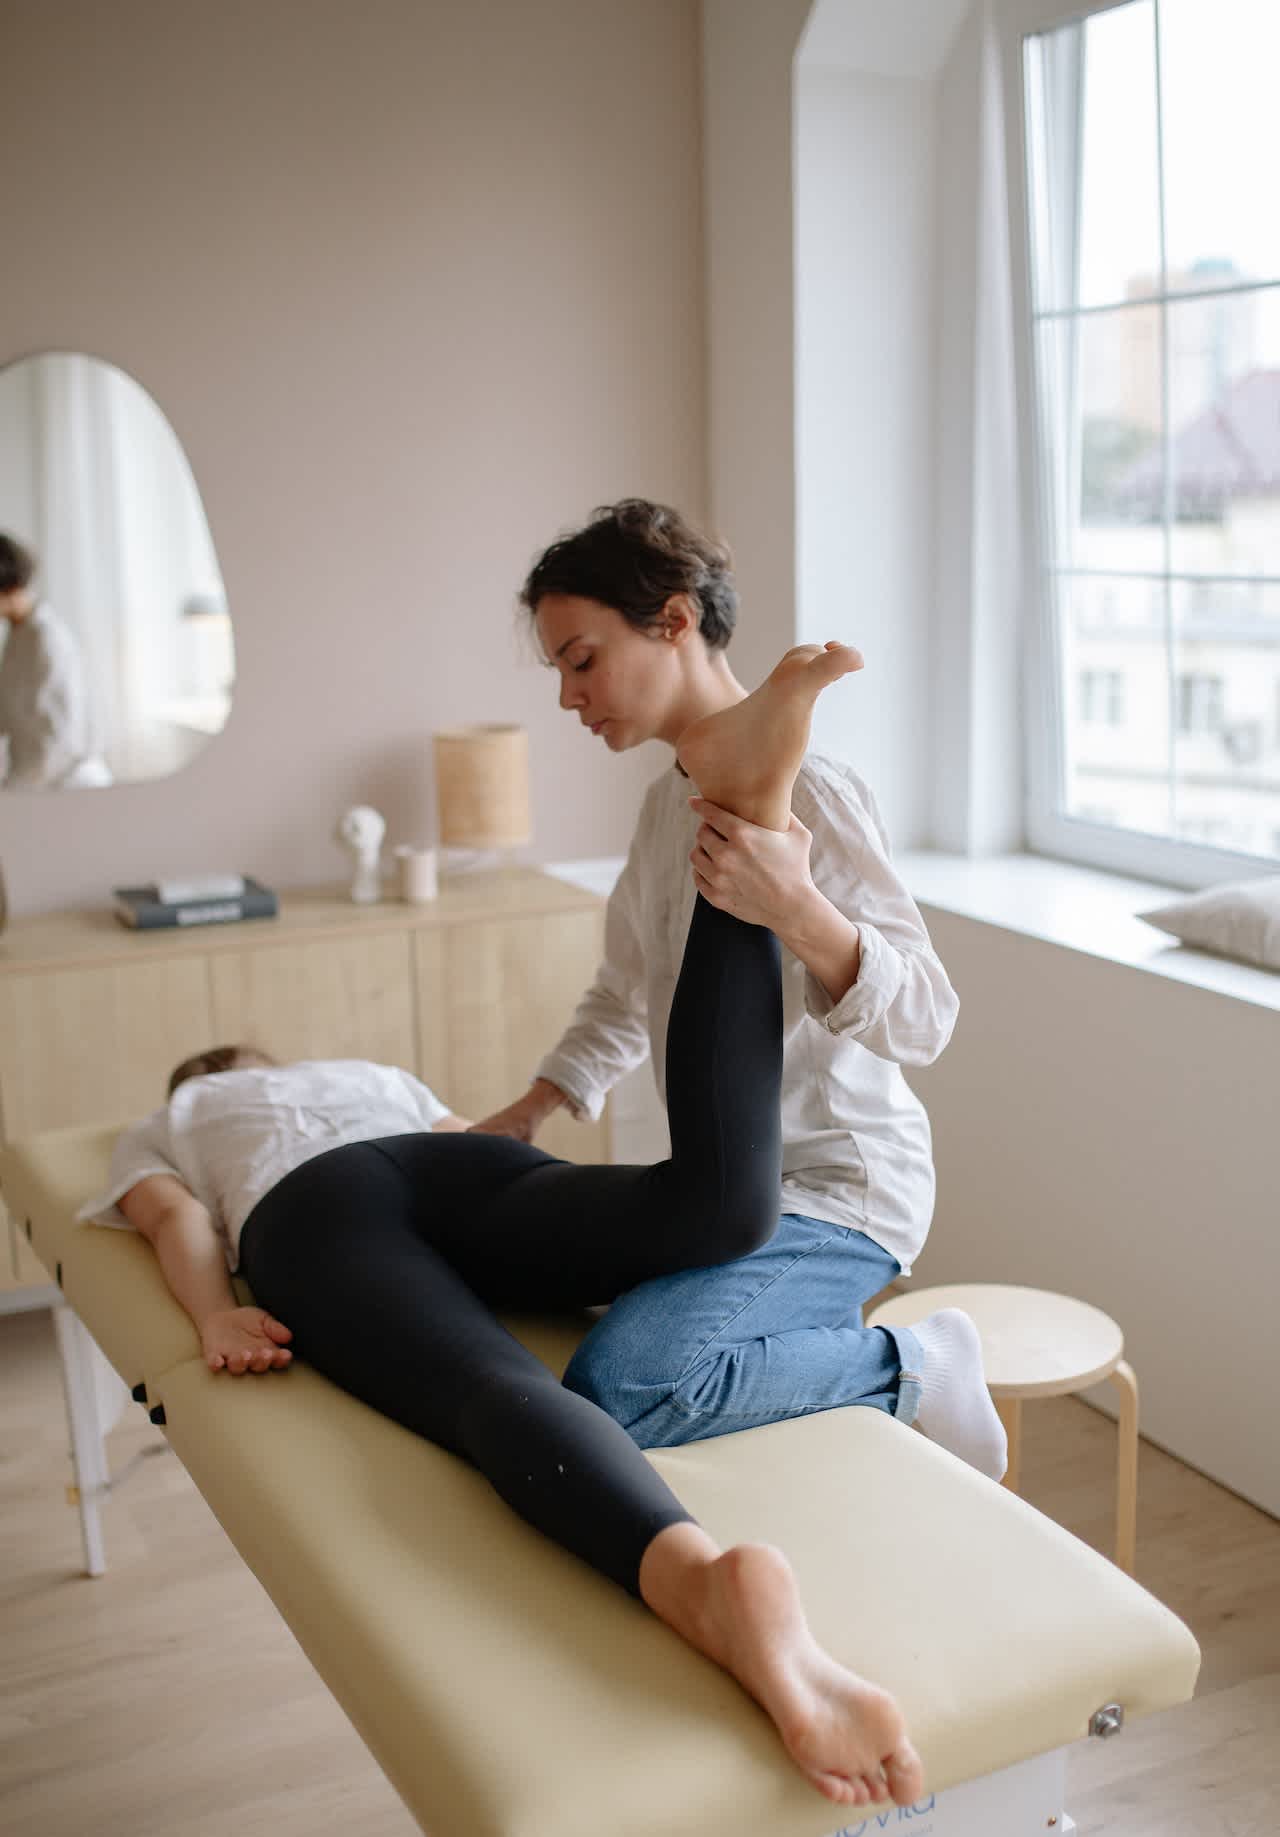 Not a stretch: how massage therapy and yoga can work together